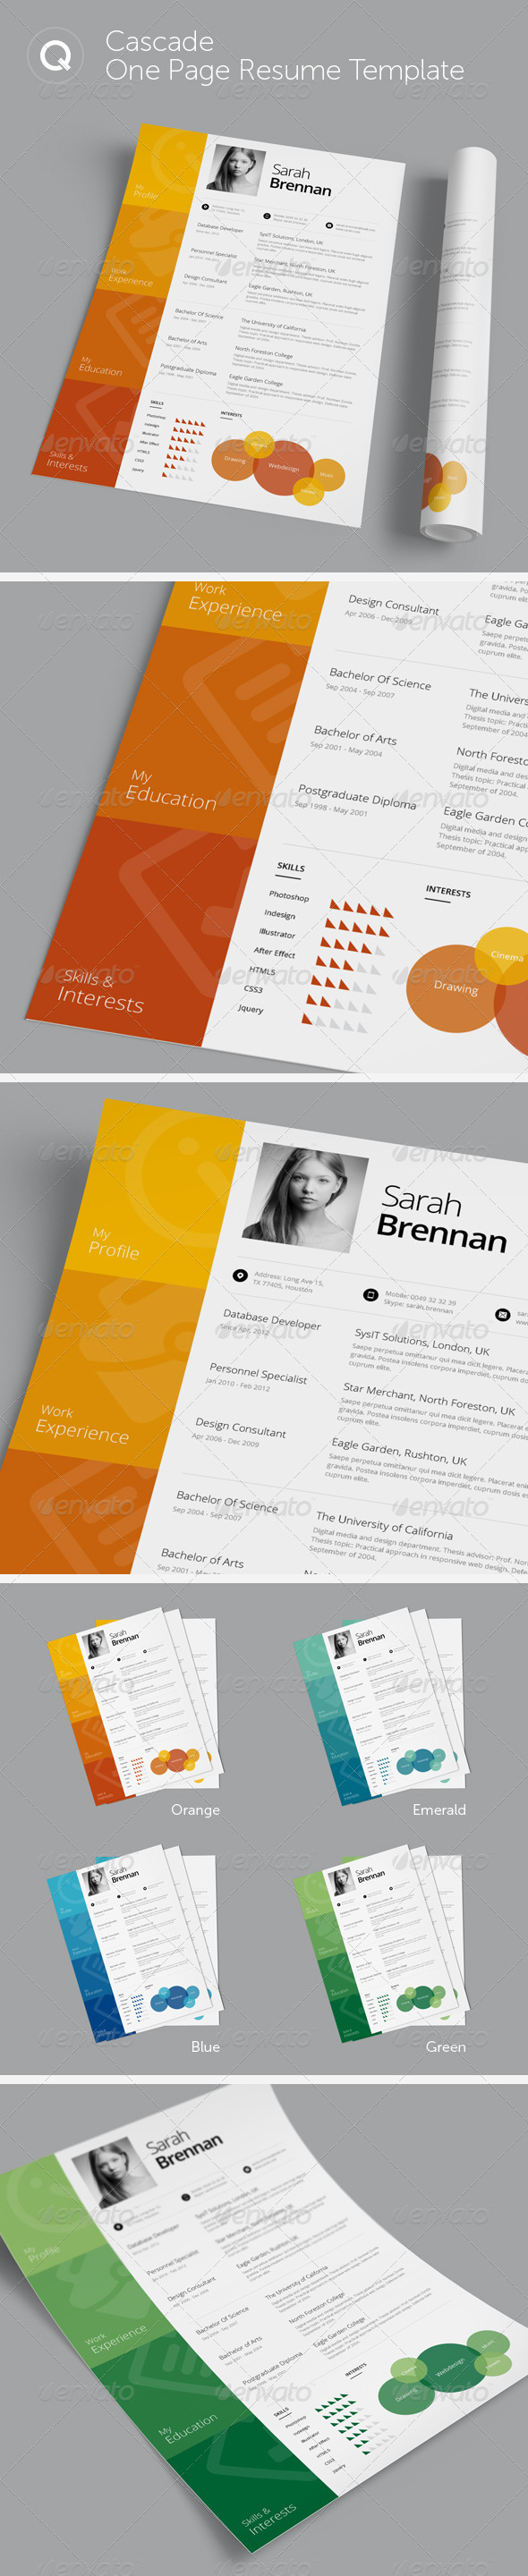 Cascade One Page Resume Template